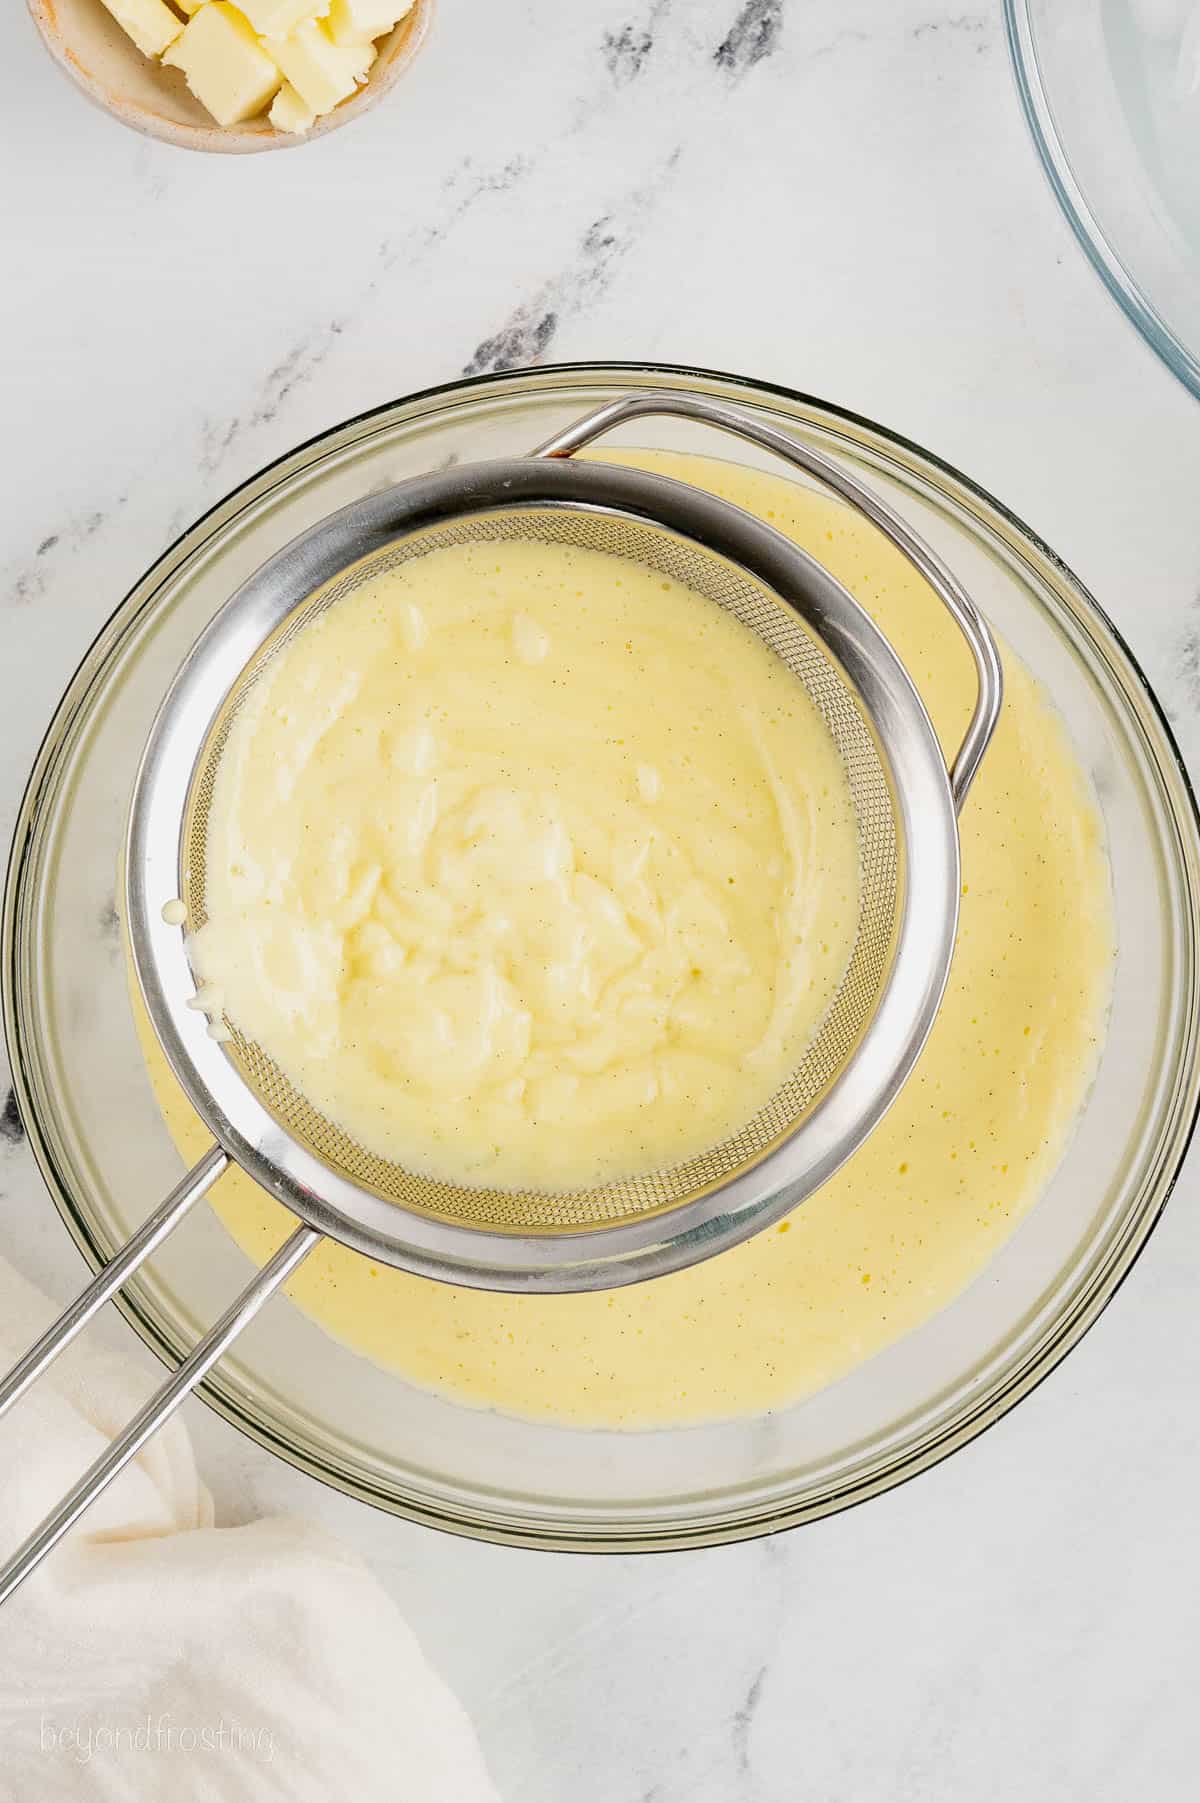 Pastry cream is strained through a mesh sieve and into a large glass bowl.